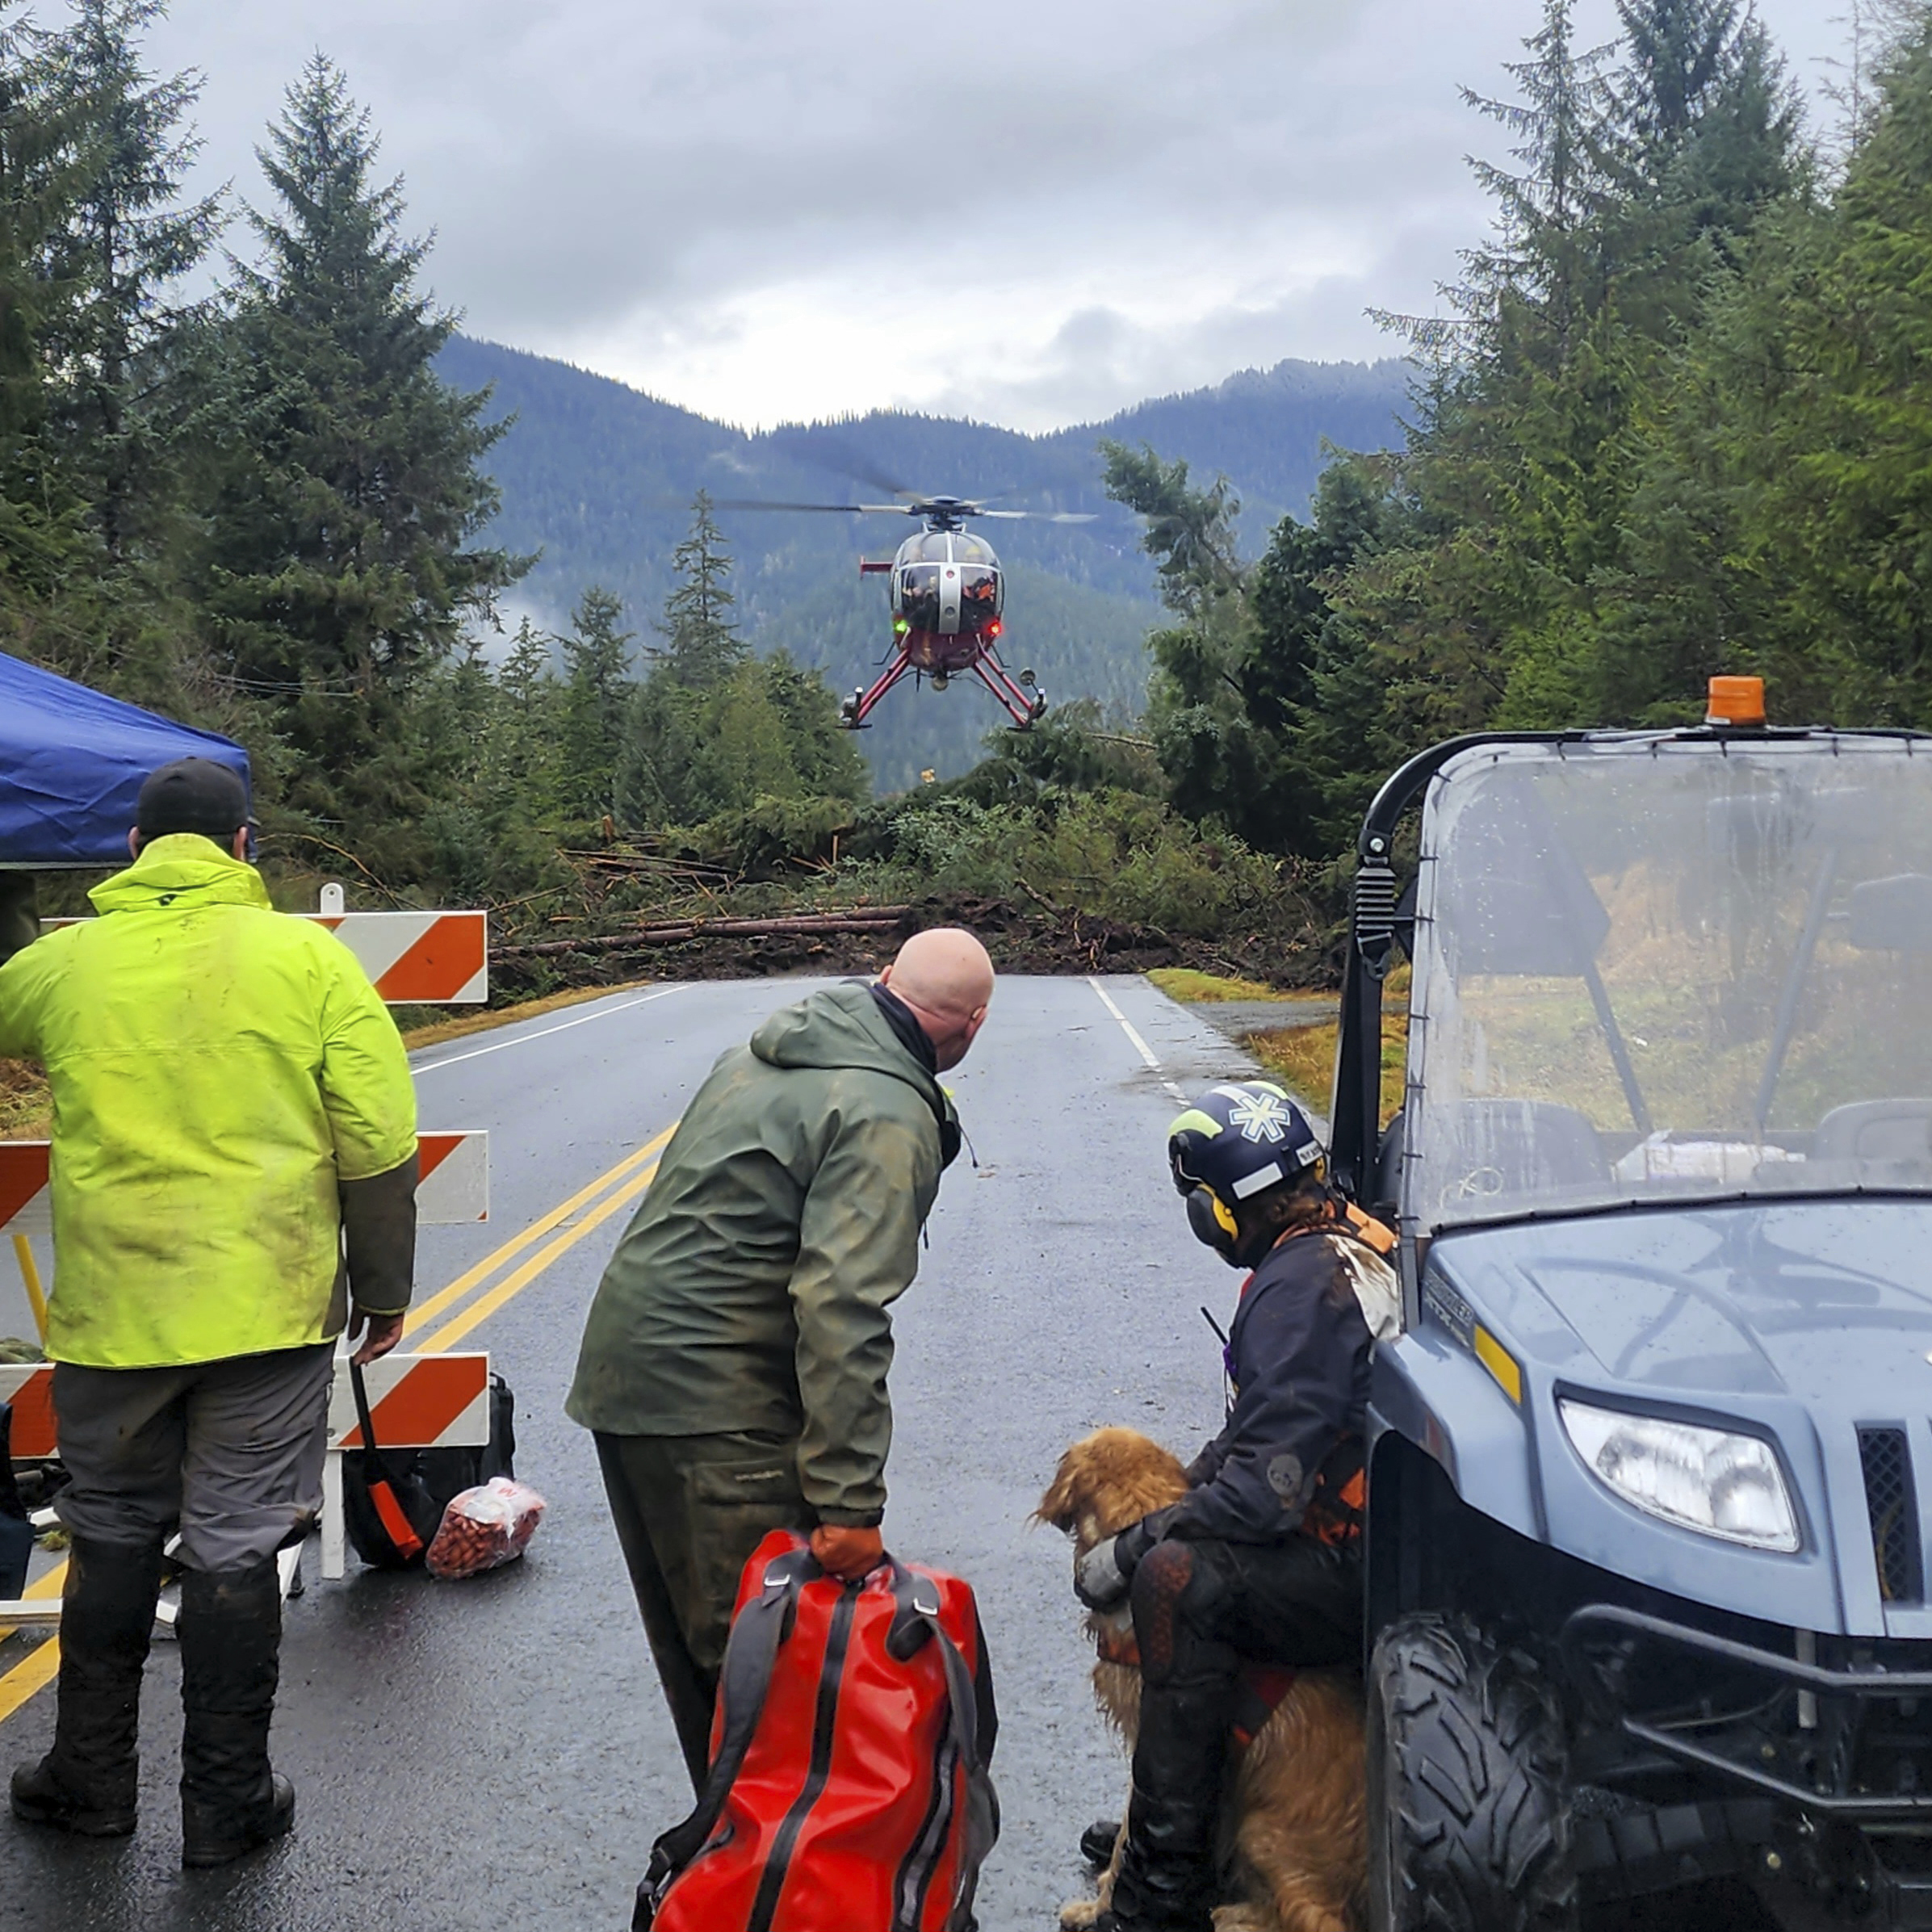 FILE - This photo provided by Division of Homeland Security and Emergency Management shows a helicopter arriving near mile 11 of the Zimovia Highway where ground teams, including search and rescue dogs, work to search areas that state geologists have determined safe for entry Wednesday, Nov. 22, 2023, in Wrangell, Alaska, following a massive landslide. Authorities on Friday, Nov. 24, identified those missing or killed in the Alaska landslide this week as five family members and their neighbor, a commercial fisherman who made a longshot bid for the state's lone seat in the U.S. House last year. (Willis Walunga/Division of Homeland Security and Emergency Management via AP, File)